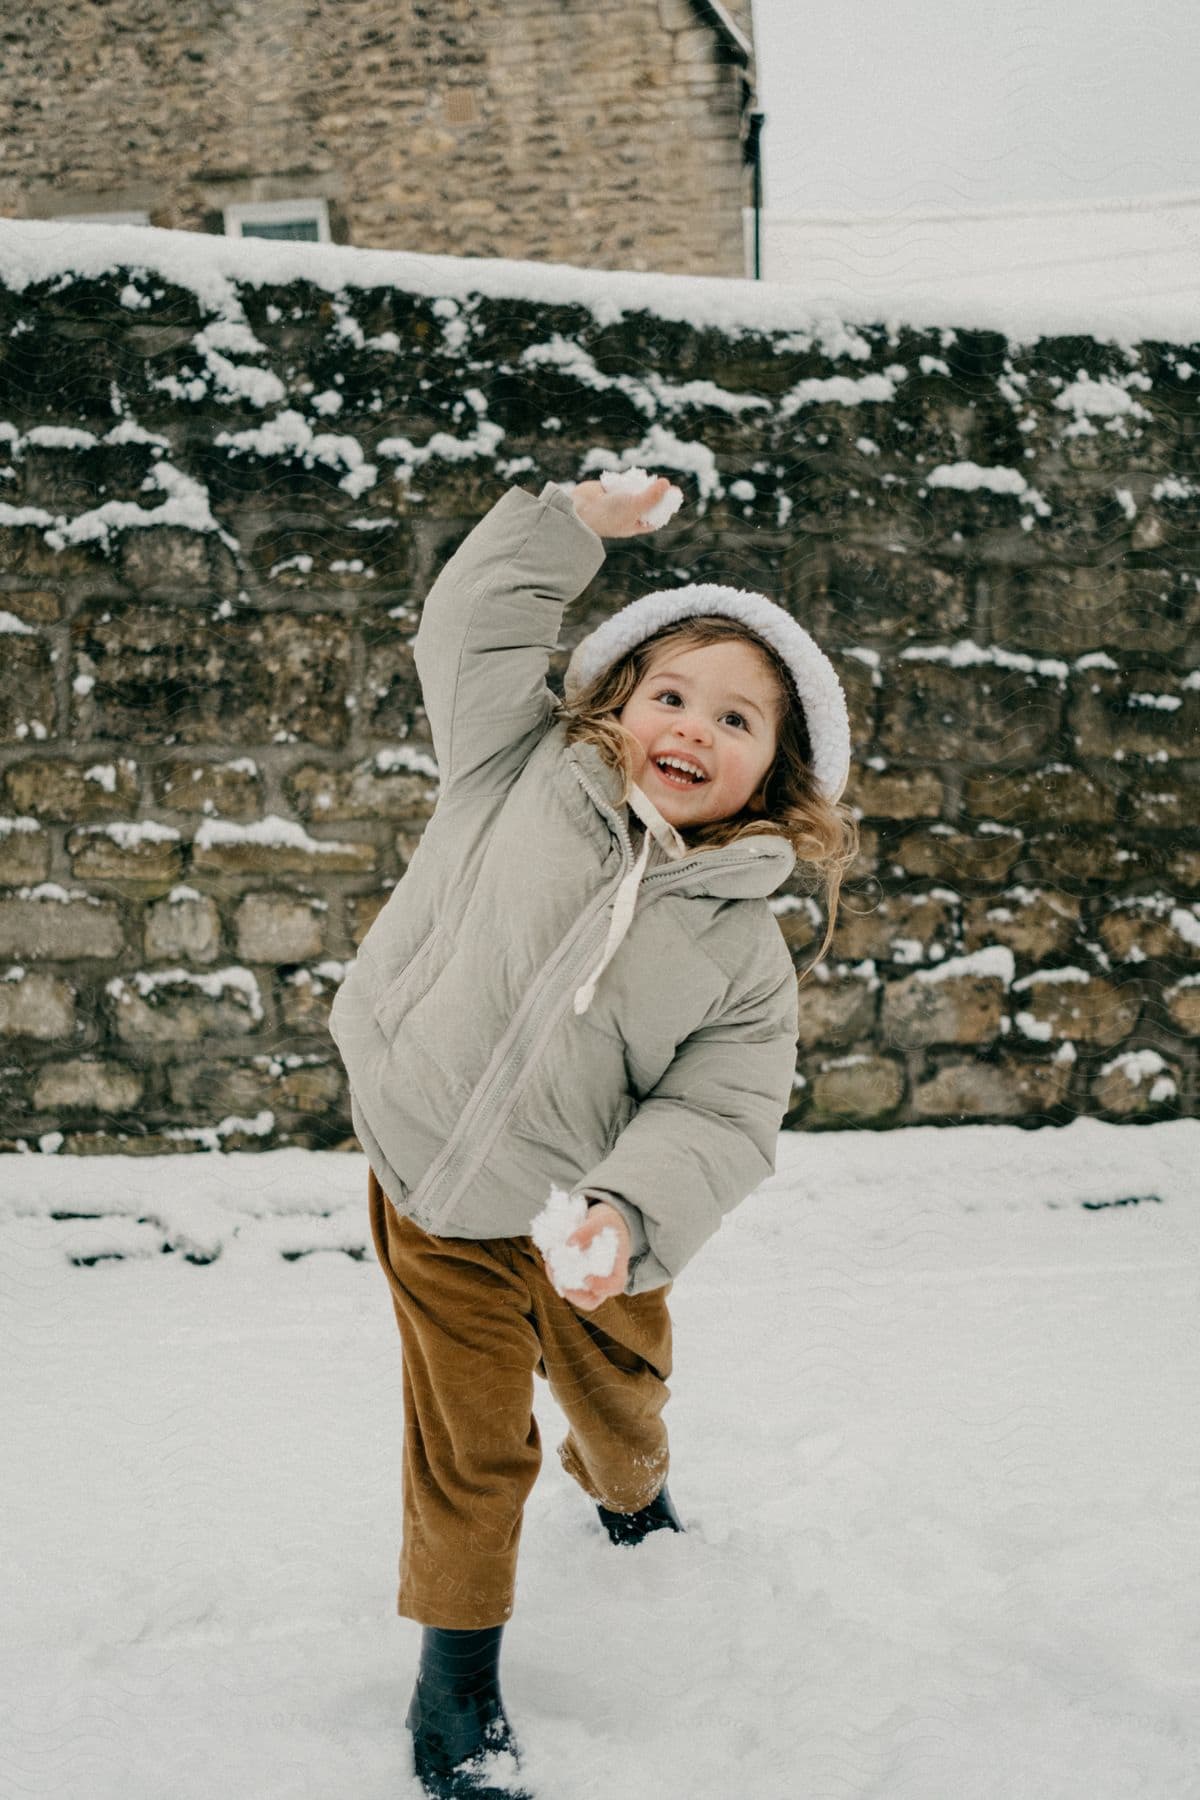 A little girl smiling while holding a snowball in a snowy environment